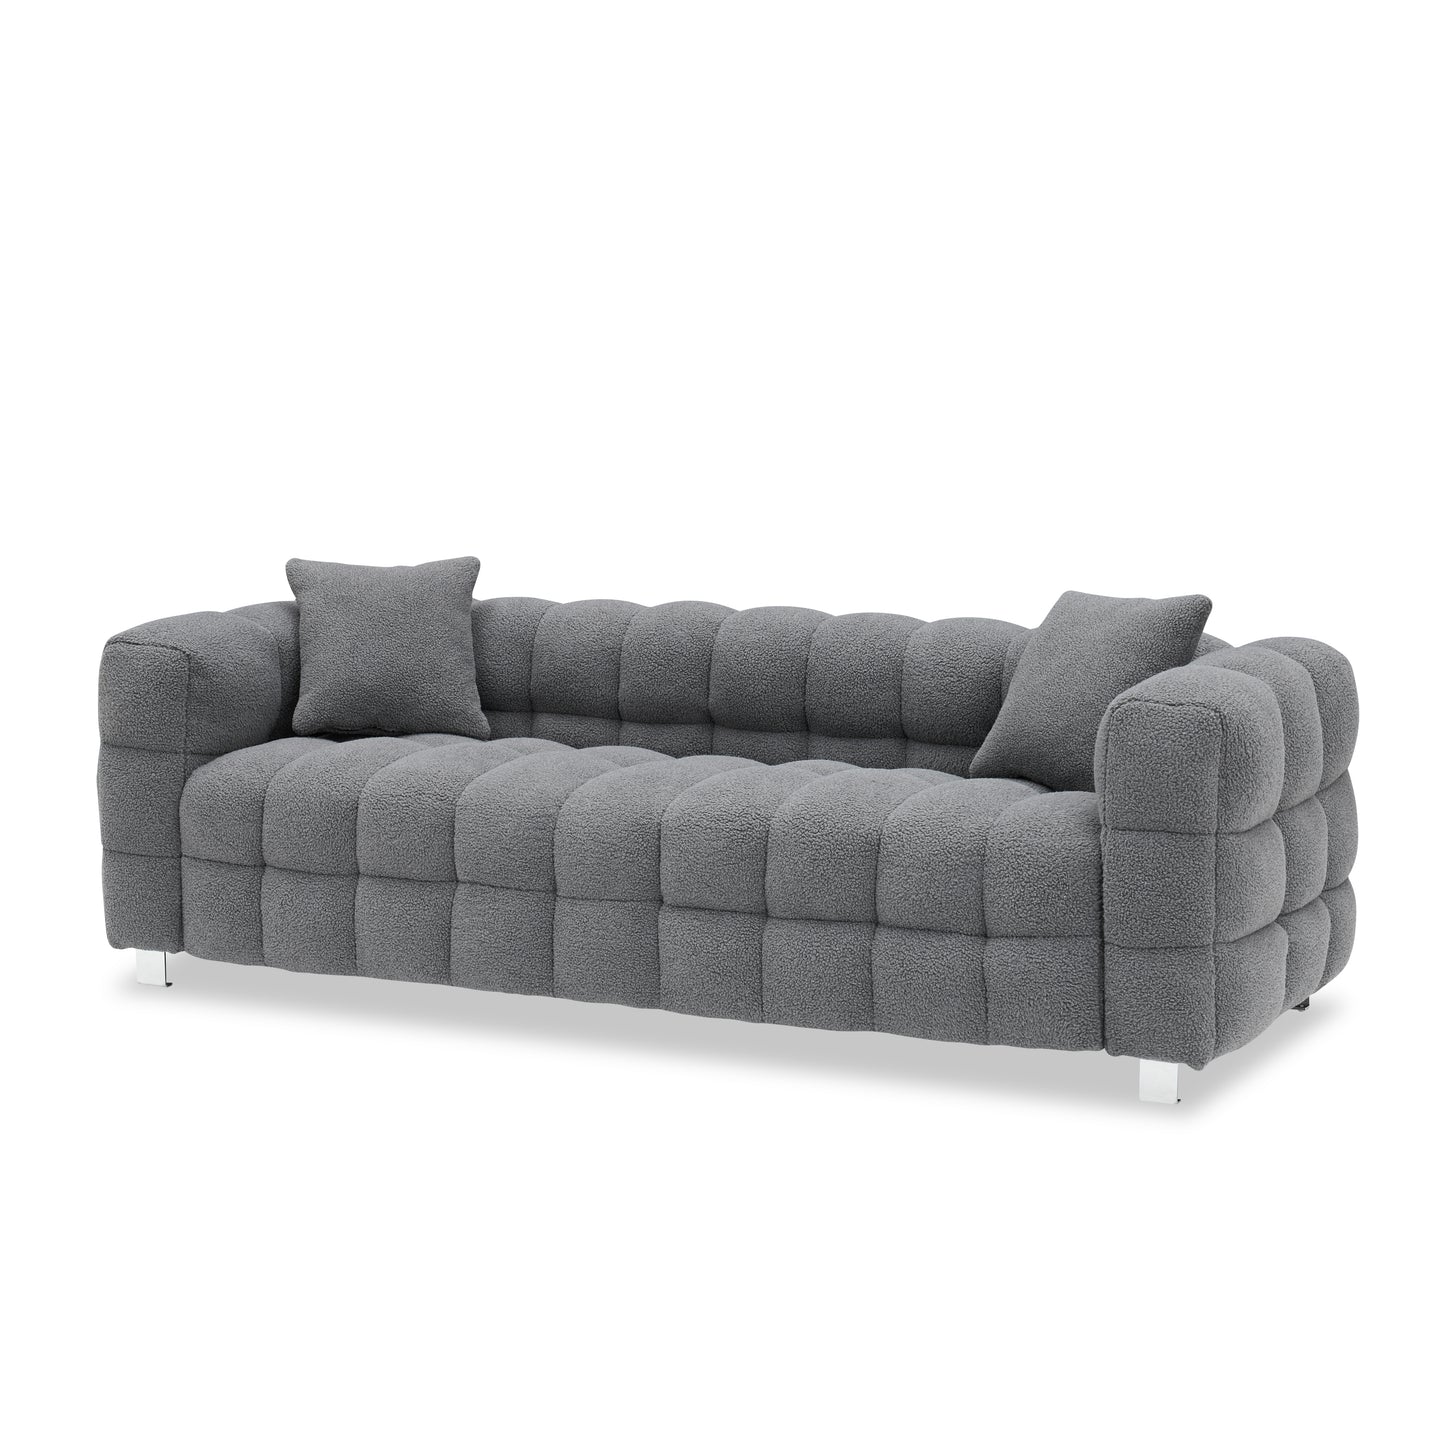 2146  Sofa Include Two Pillows 80" Gray Grain Fleece Fabric Suitable For Living Room Bedroom Apartment